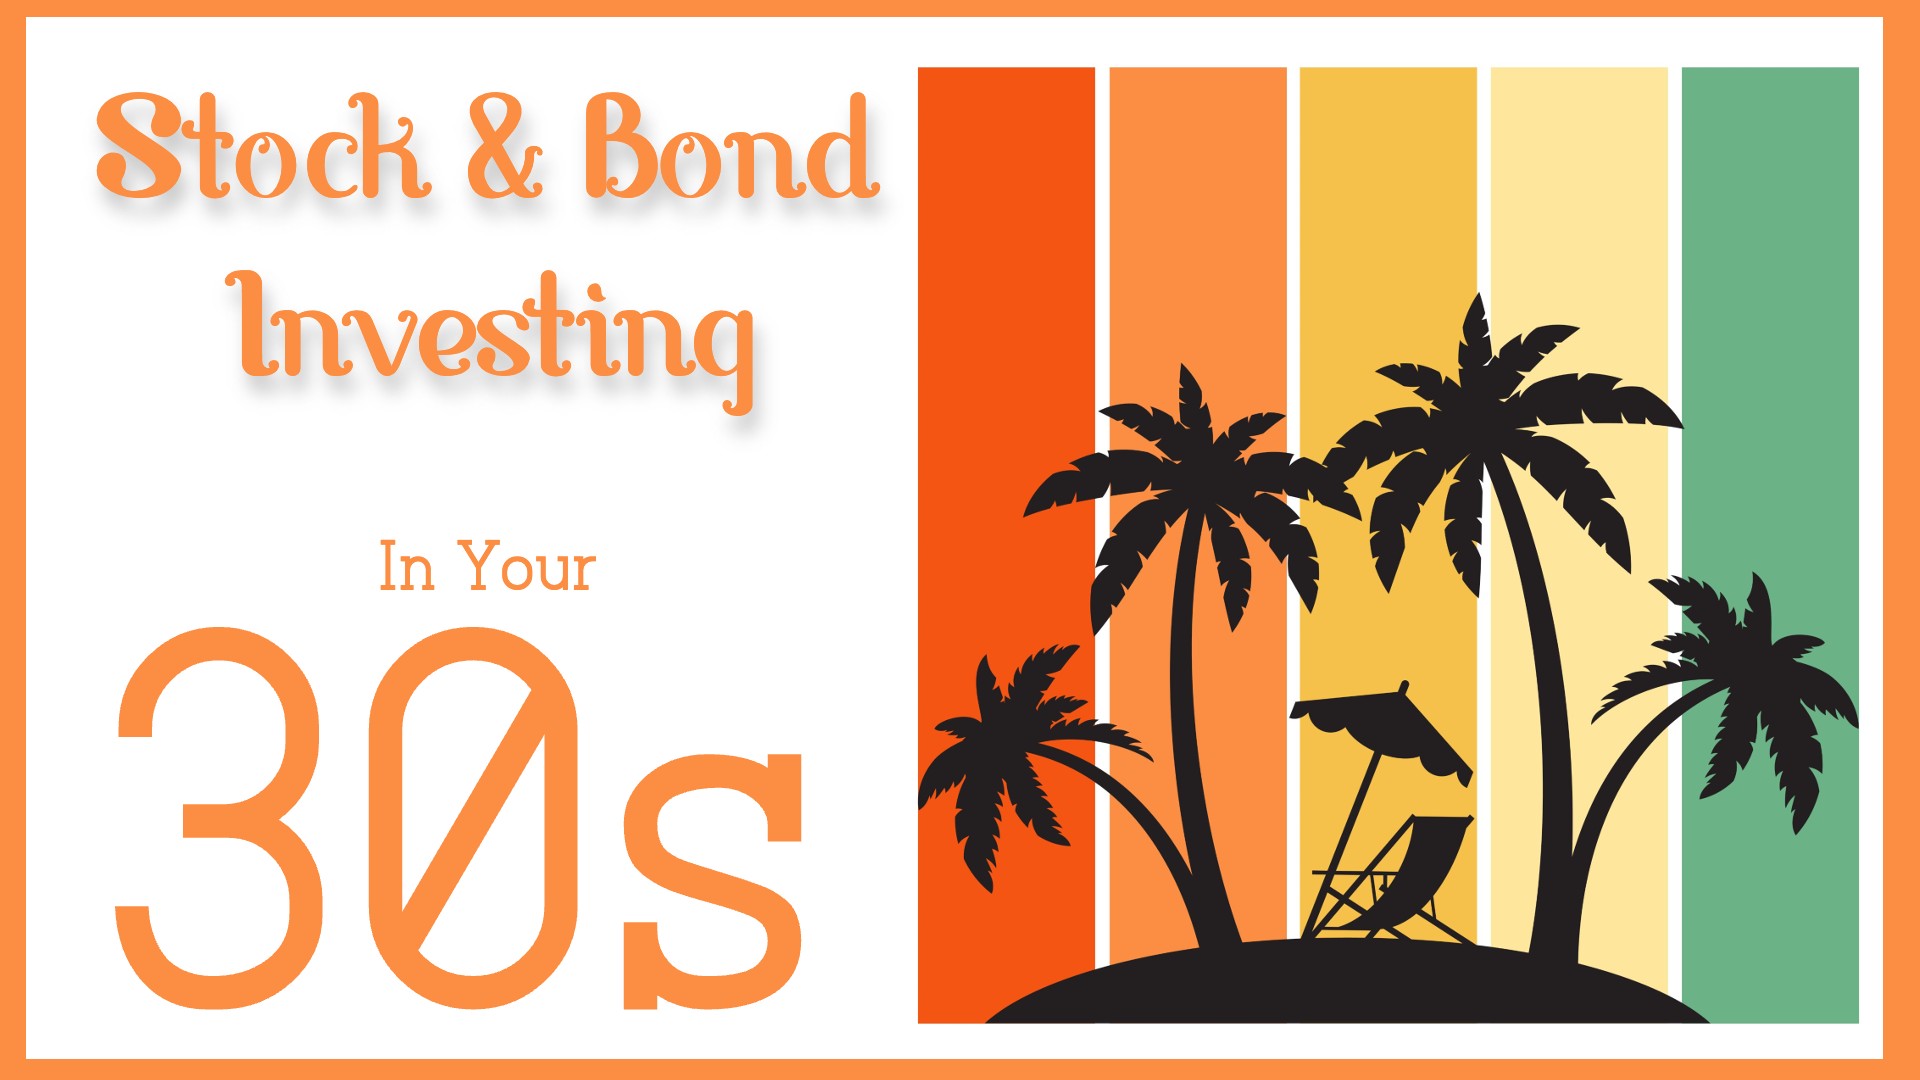 Stock & Bond Investing in Your 30s